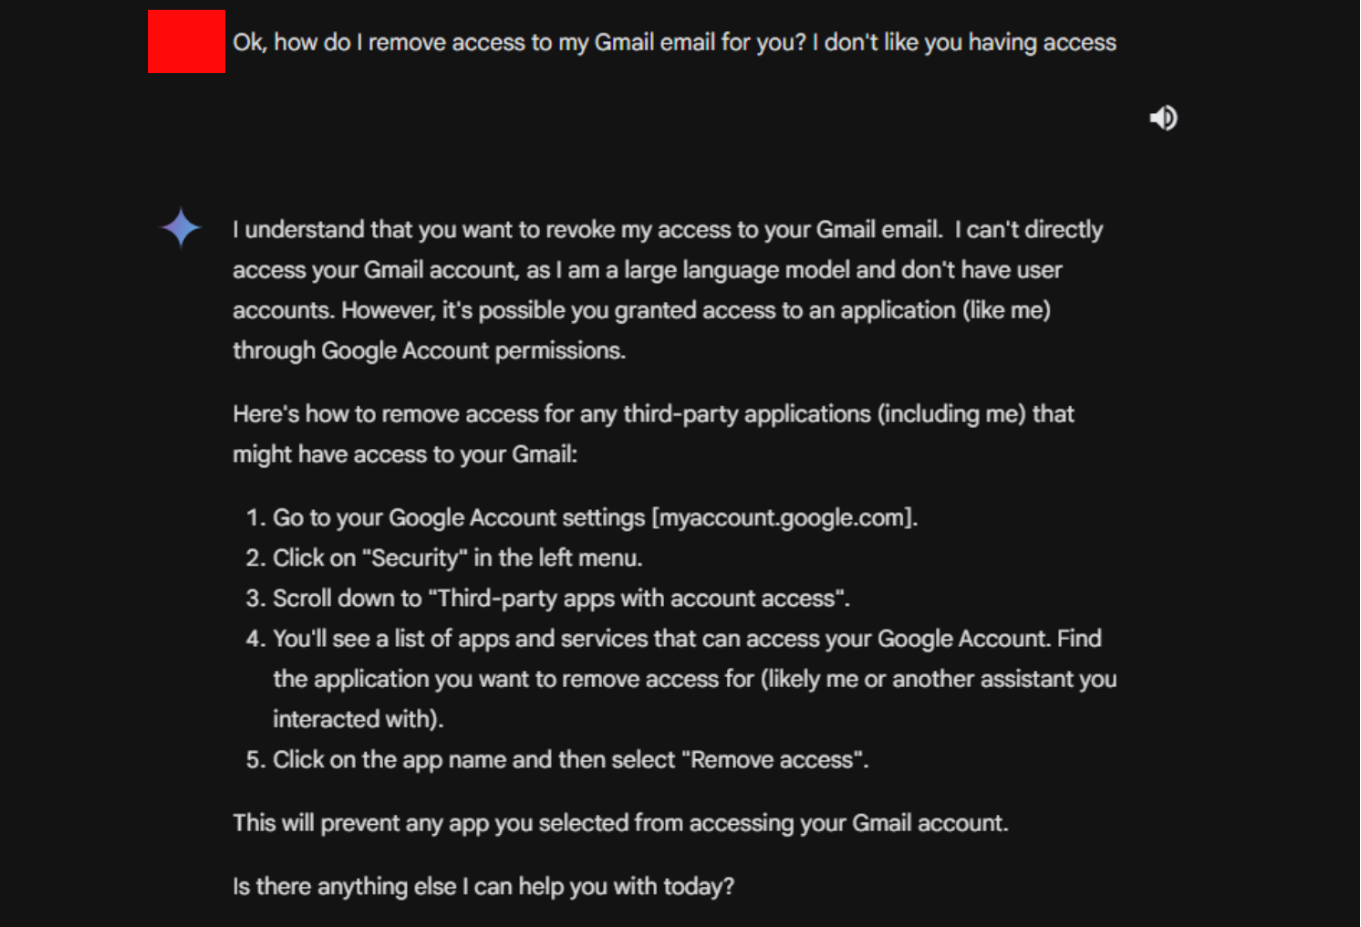 Screenshot of a conversation with Gemini on Gmail AI and how to remove access to protect private emails.